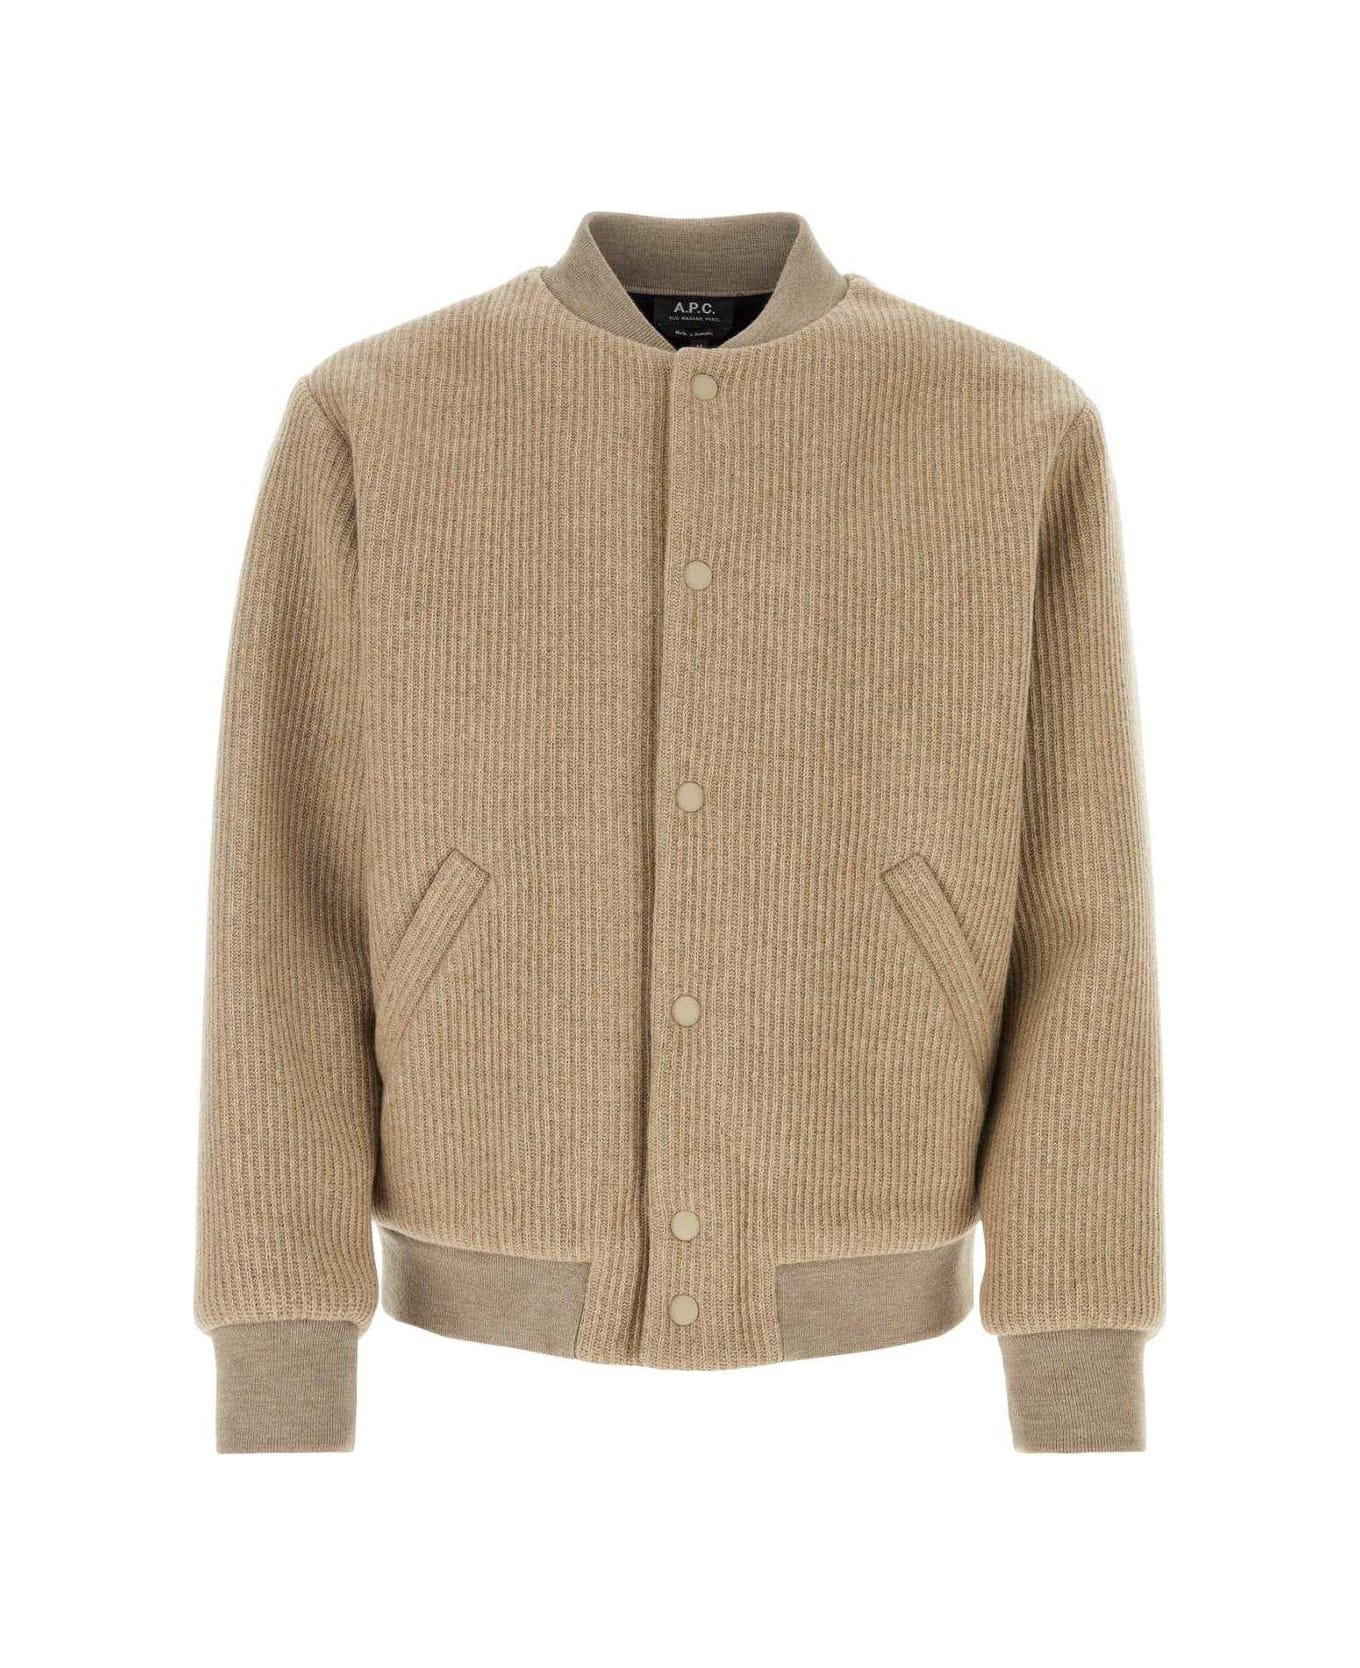 A.P.C. Mick Buttoned Long-sleeved Jacket - NEUTRALS